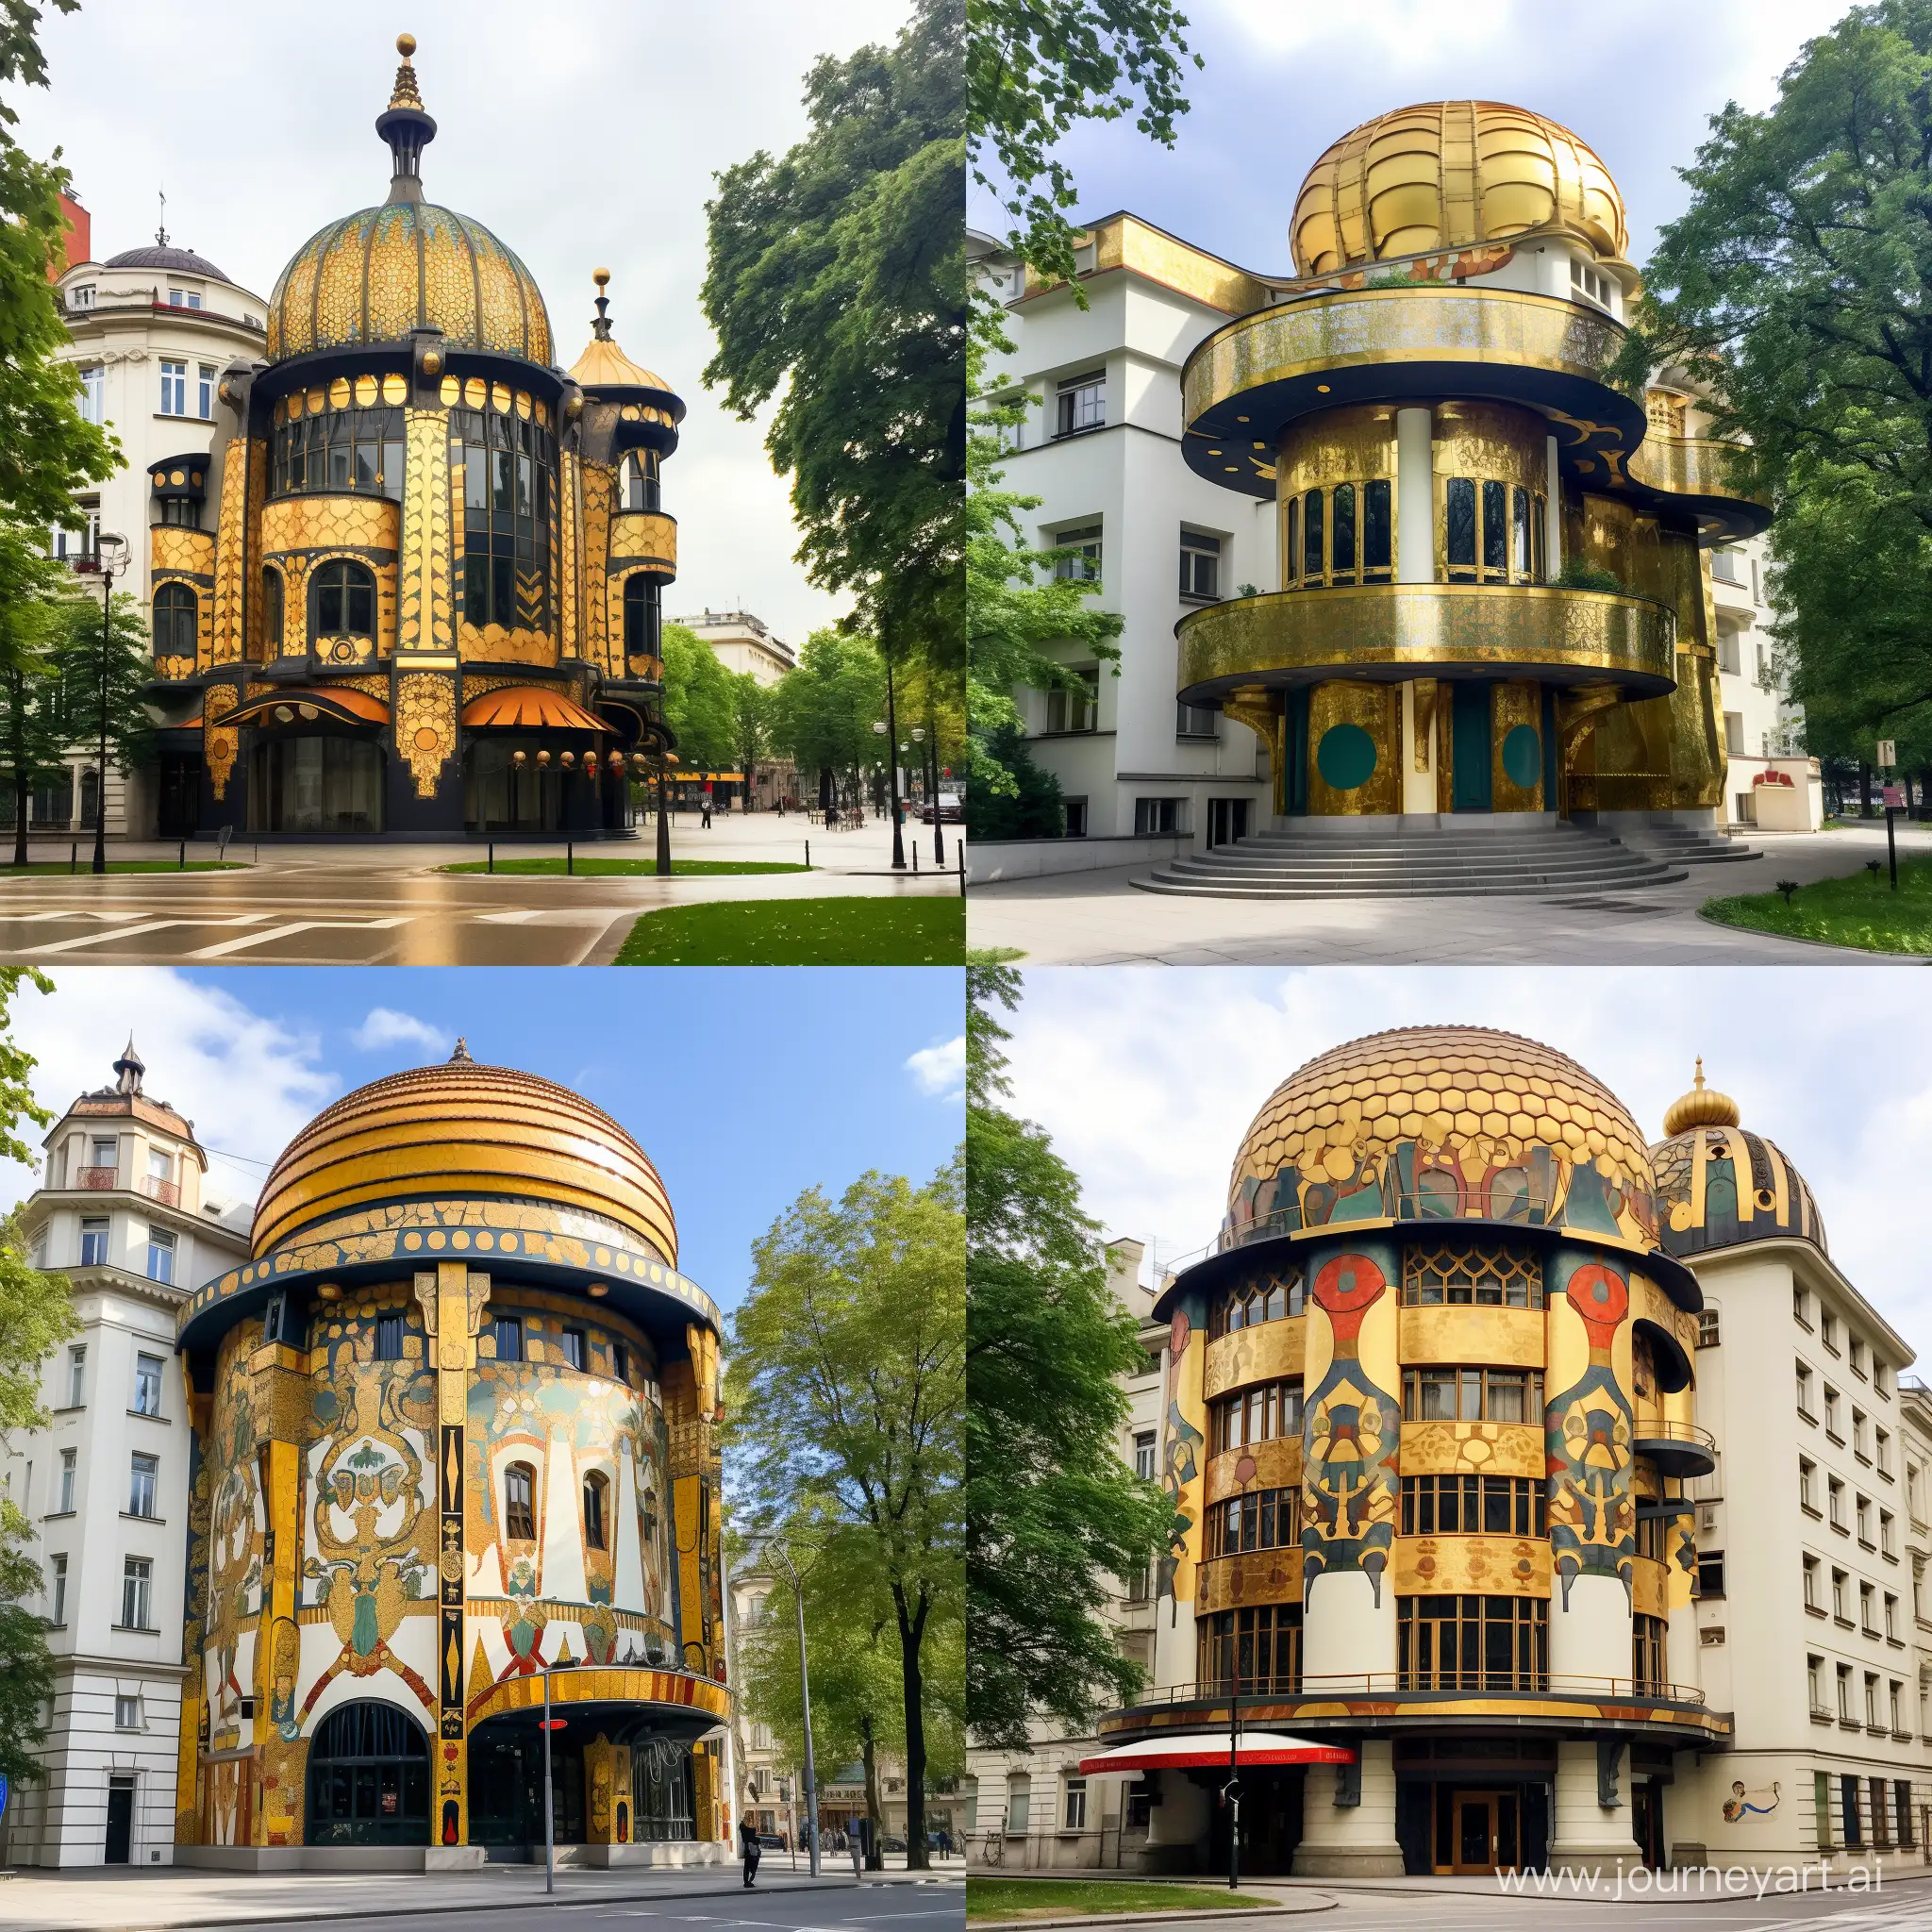 Vienna Secession Museum in the style of Gustav Klimt, accentuating the golden dome at the top